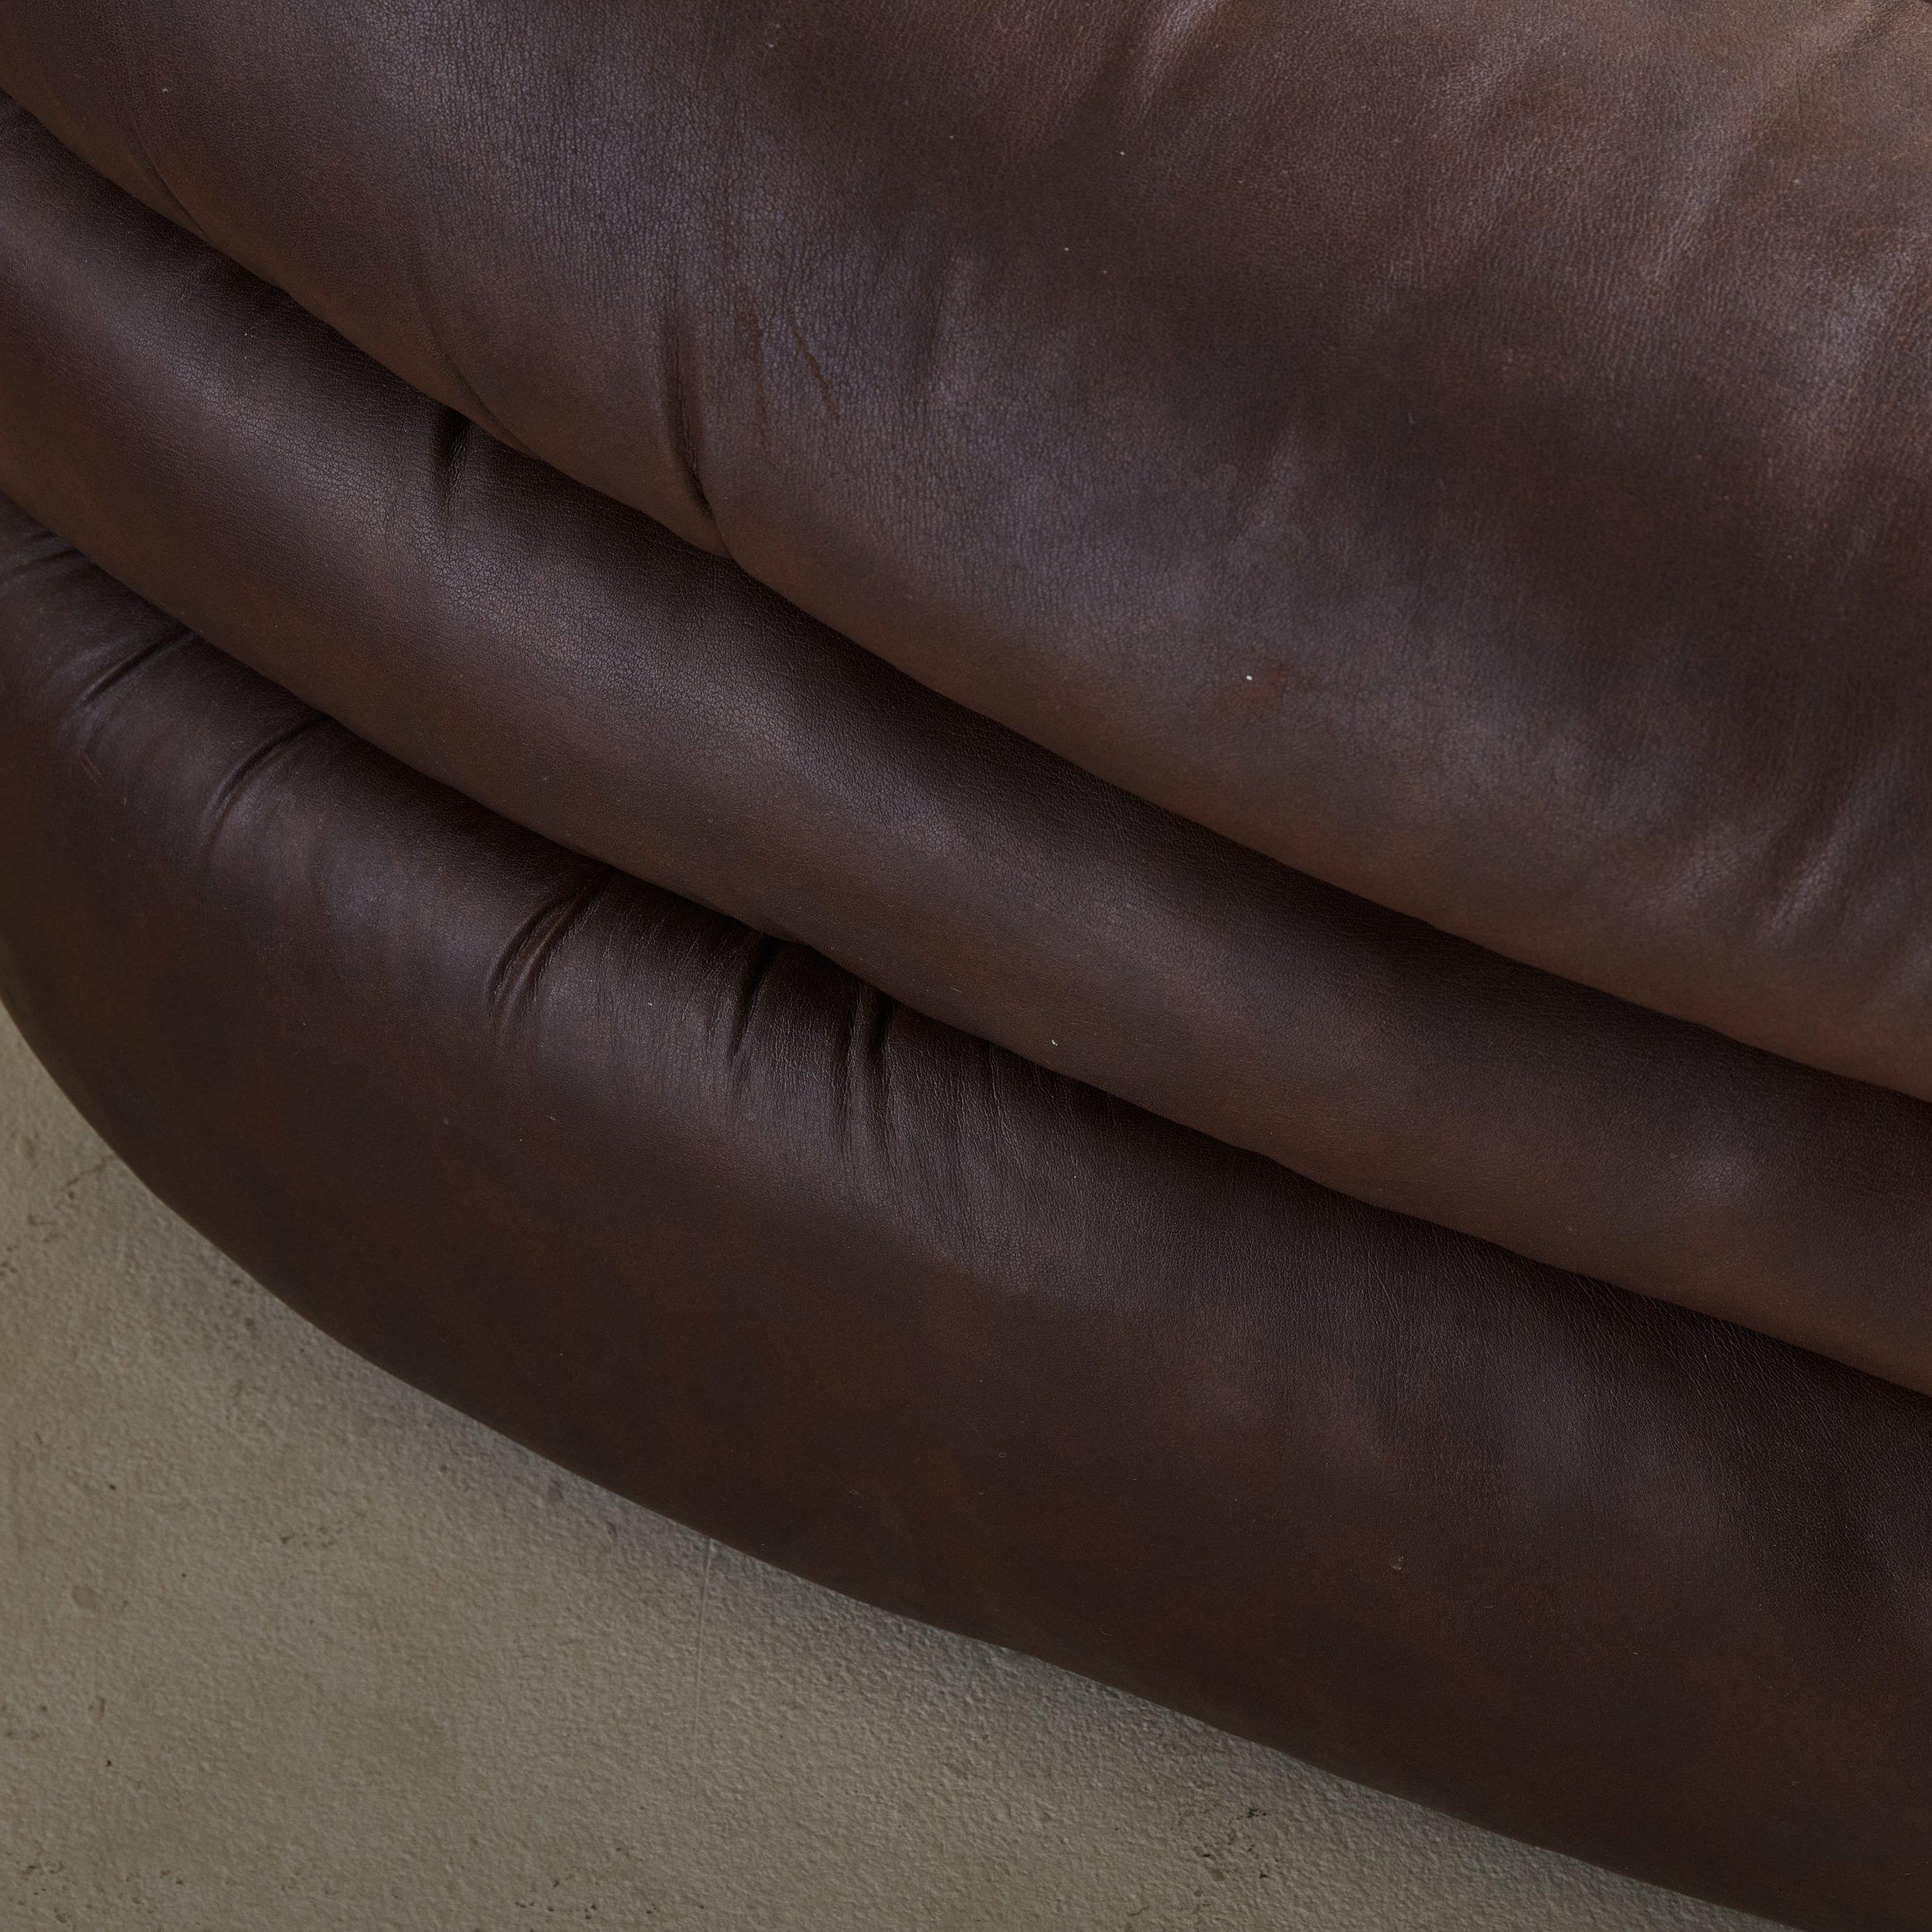 Pair of Large Brown Leather Lounge Chairs by de Pas, D’Urbino & Lomazzi, Italy For Sale 2